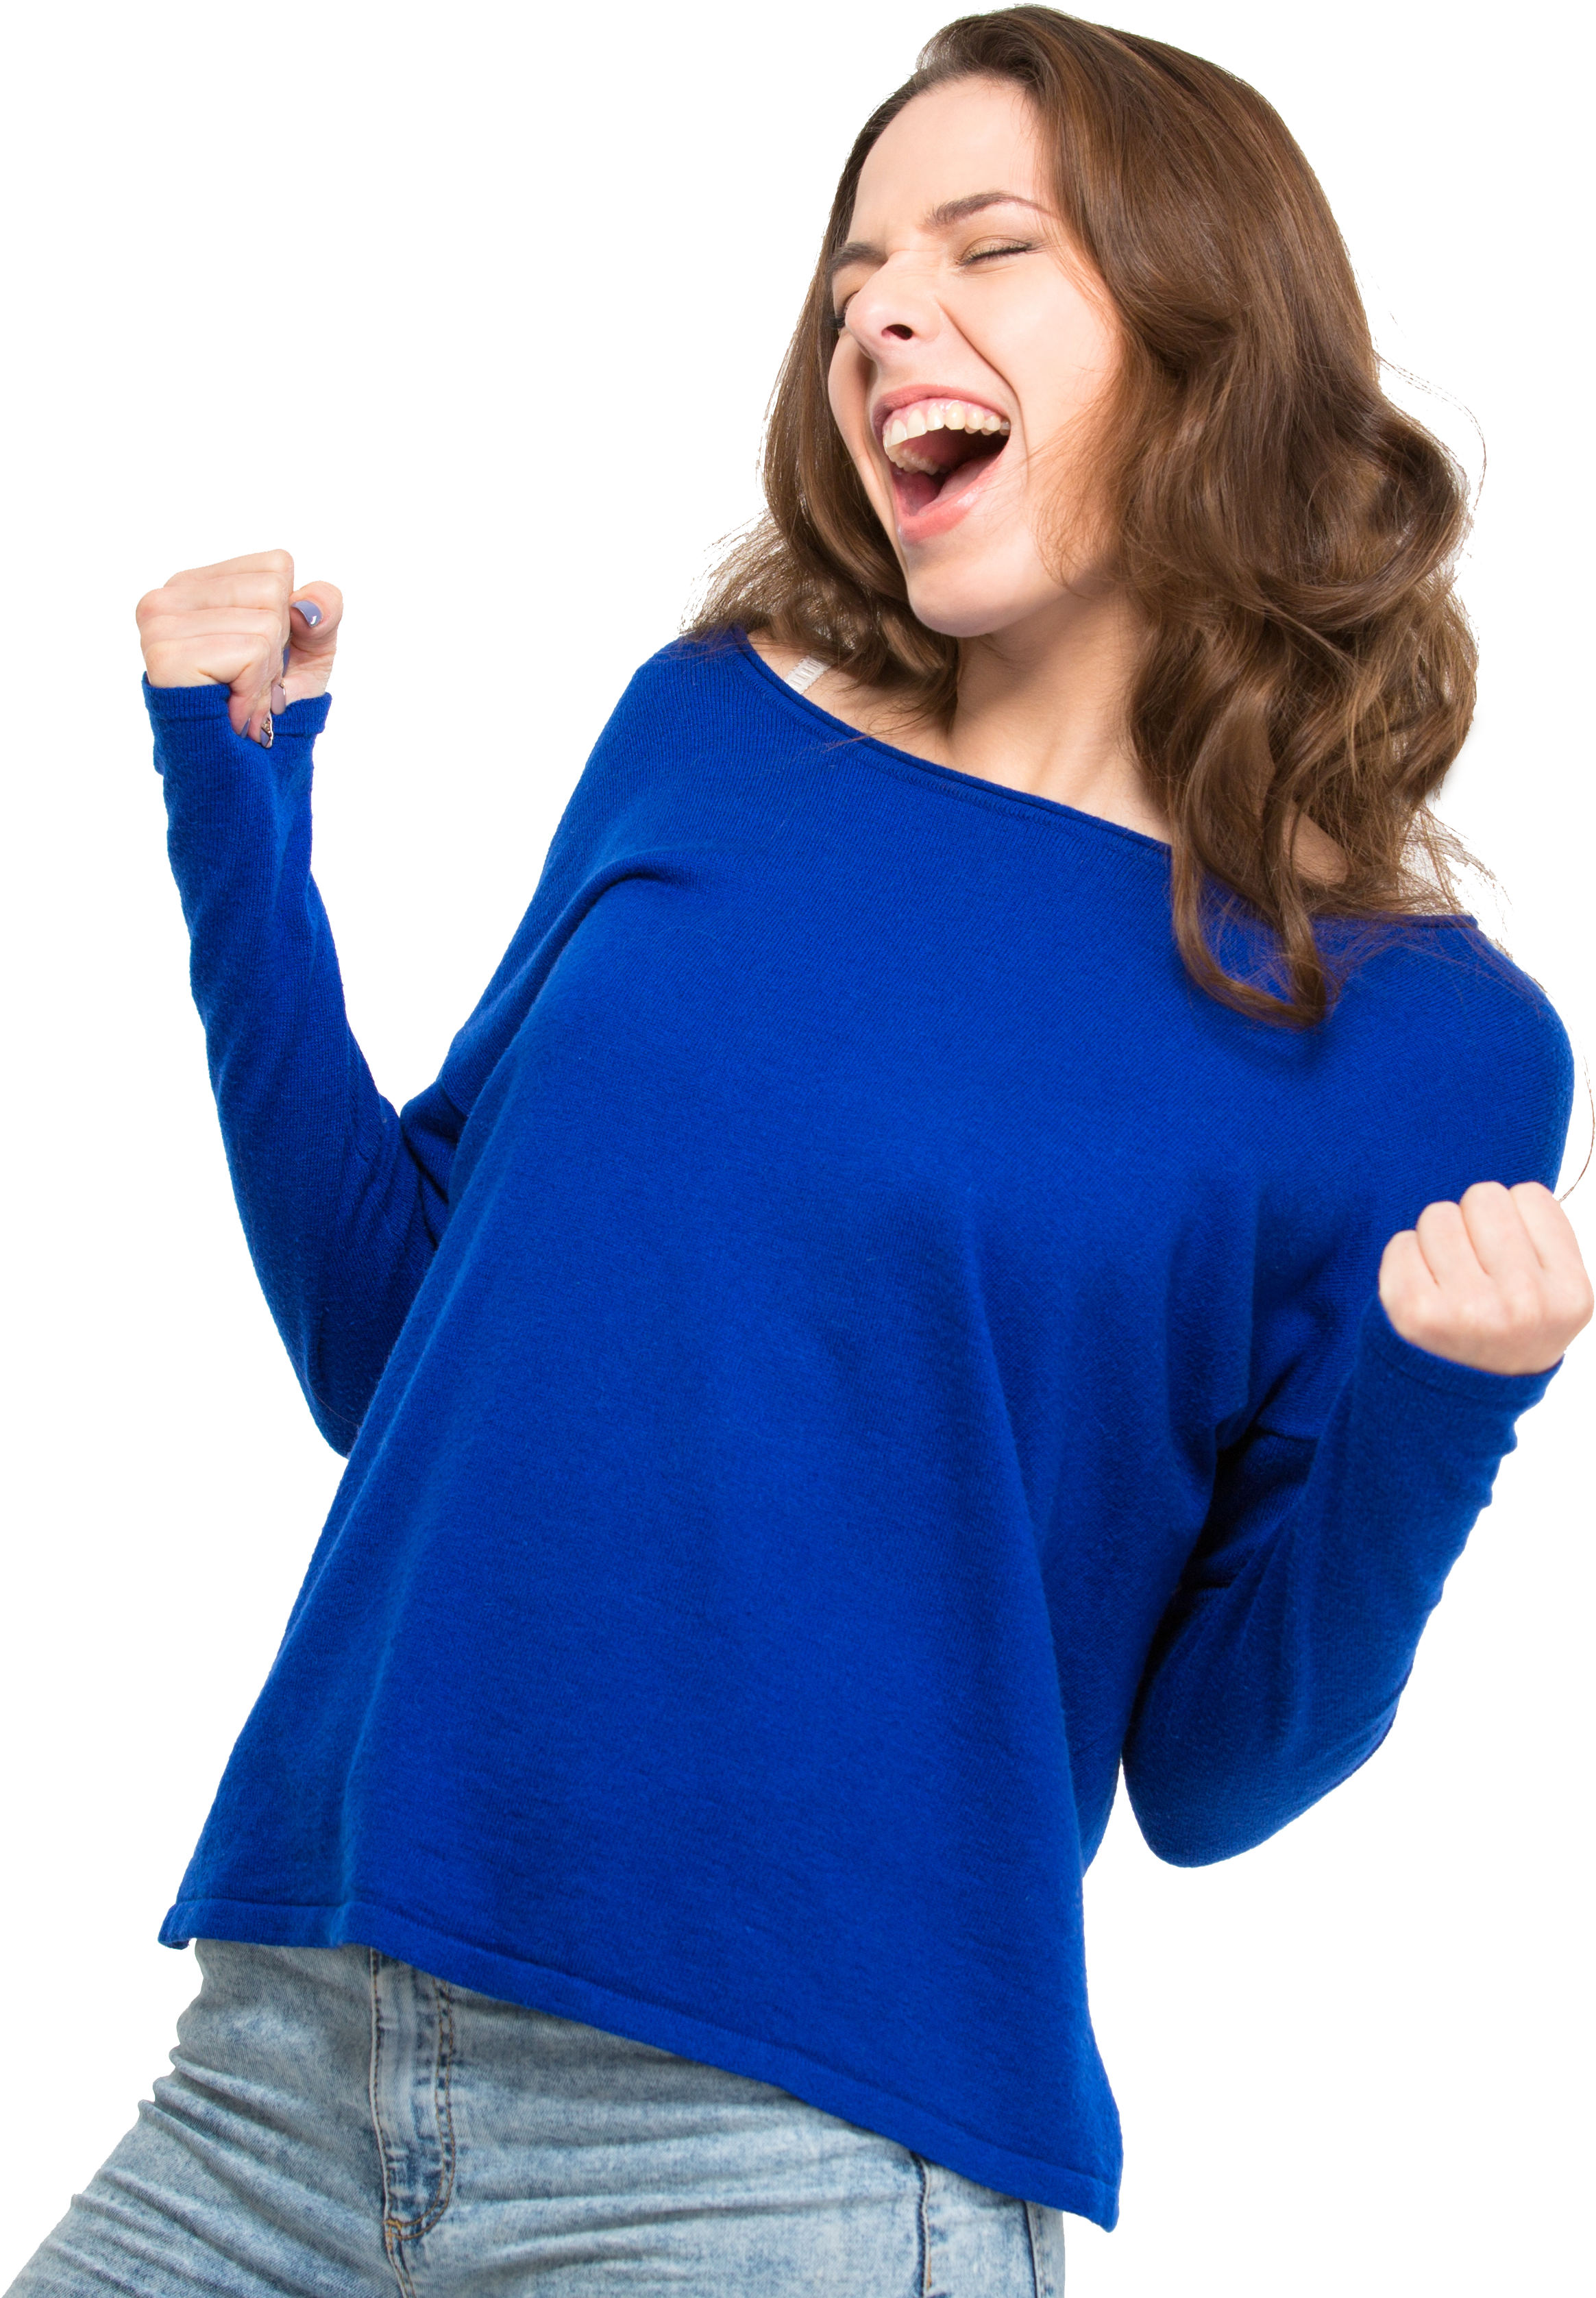 Excited Woman Celebrating Success PNG image